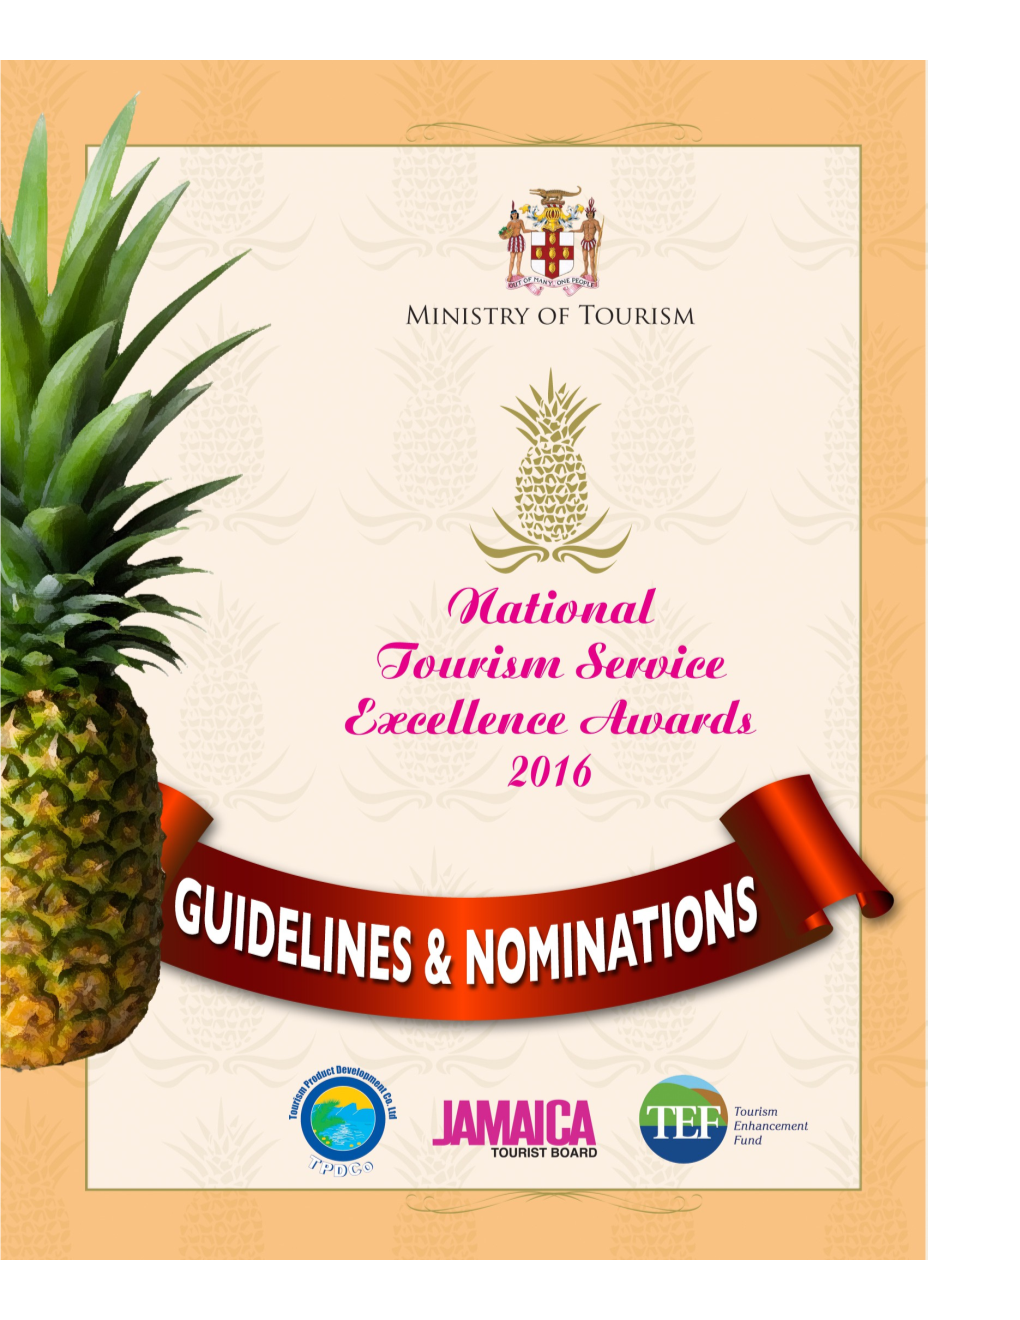 National Tourism Service Excellence Awards